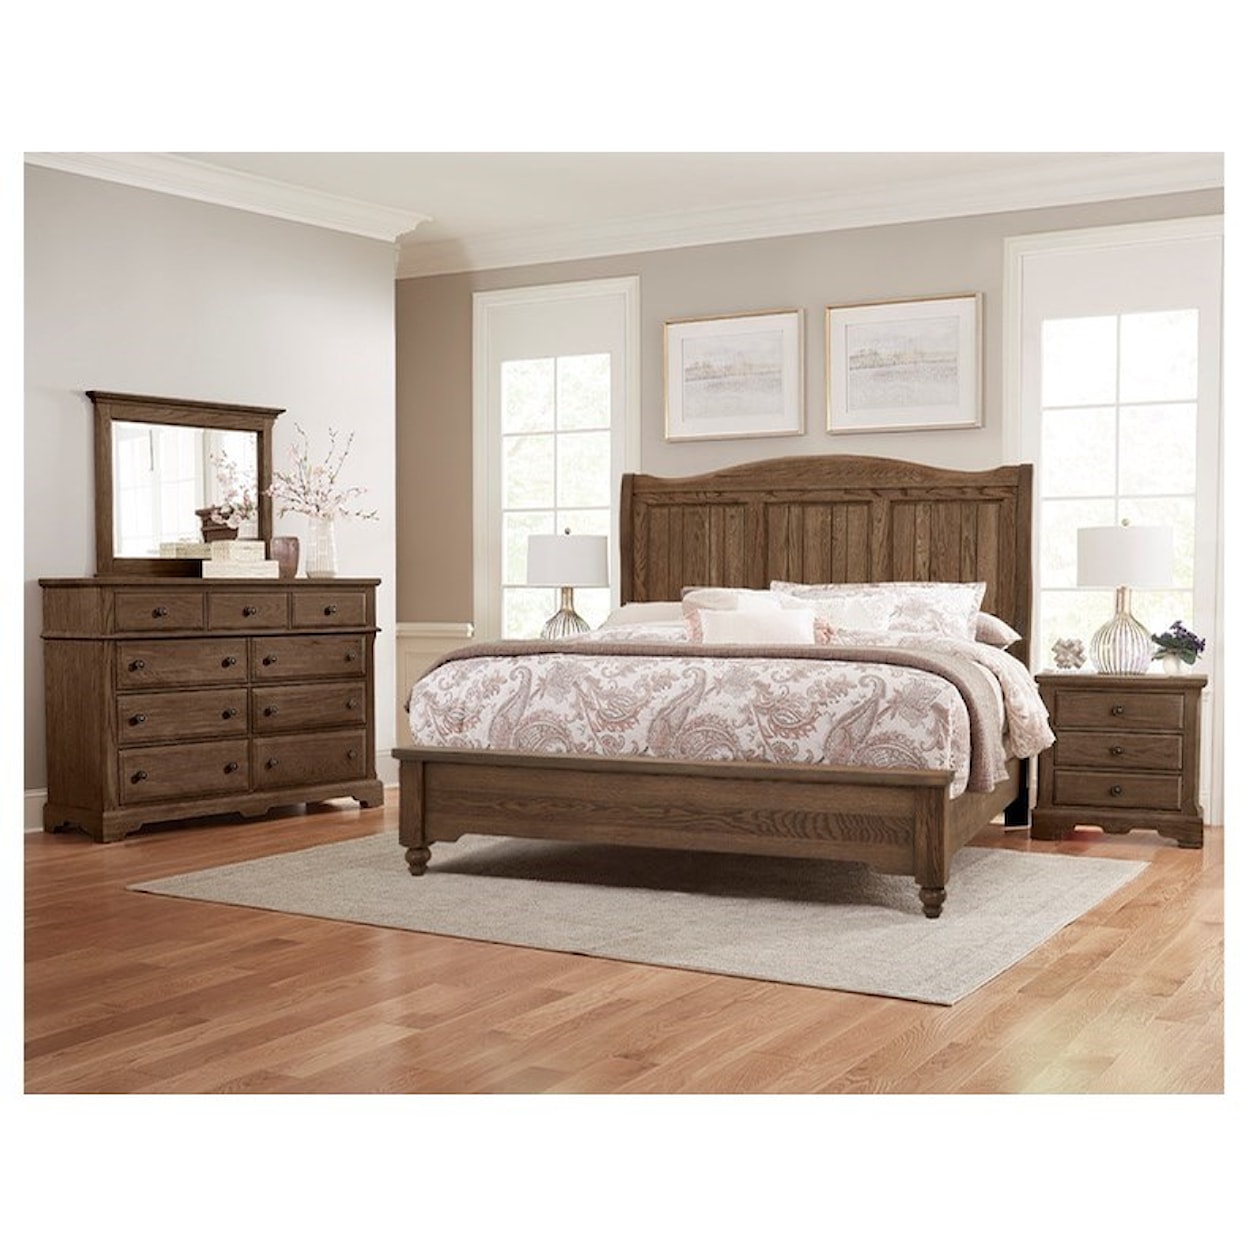 Virginia House Heritage King Low Profile Bed